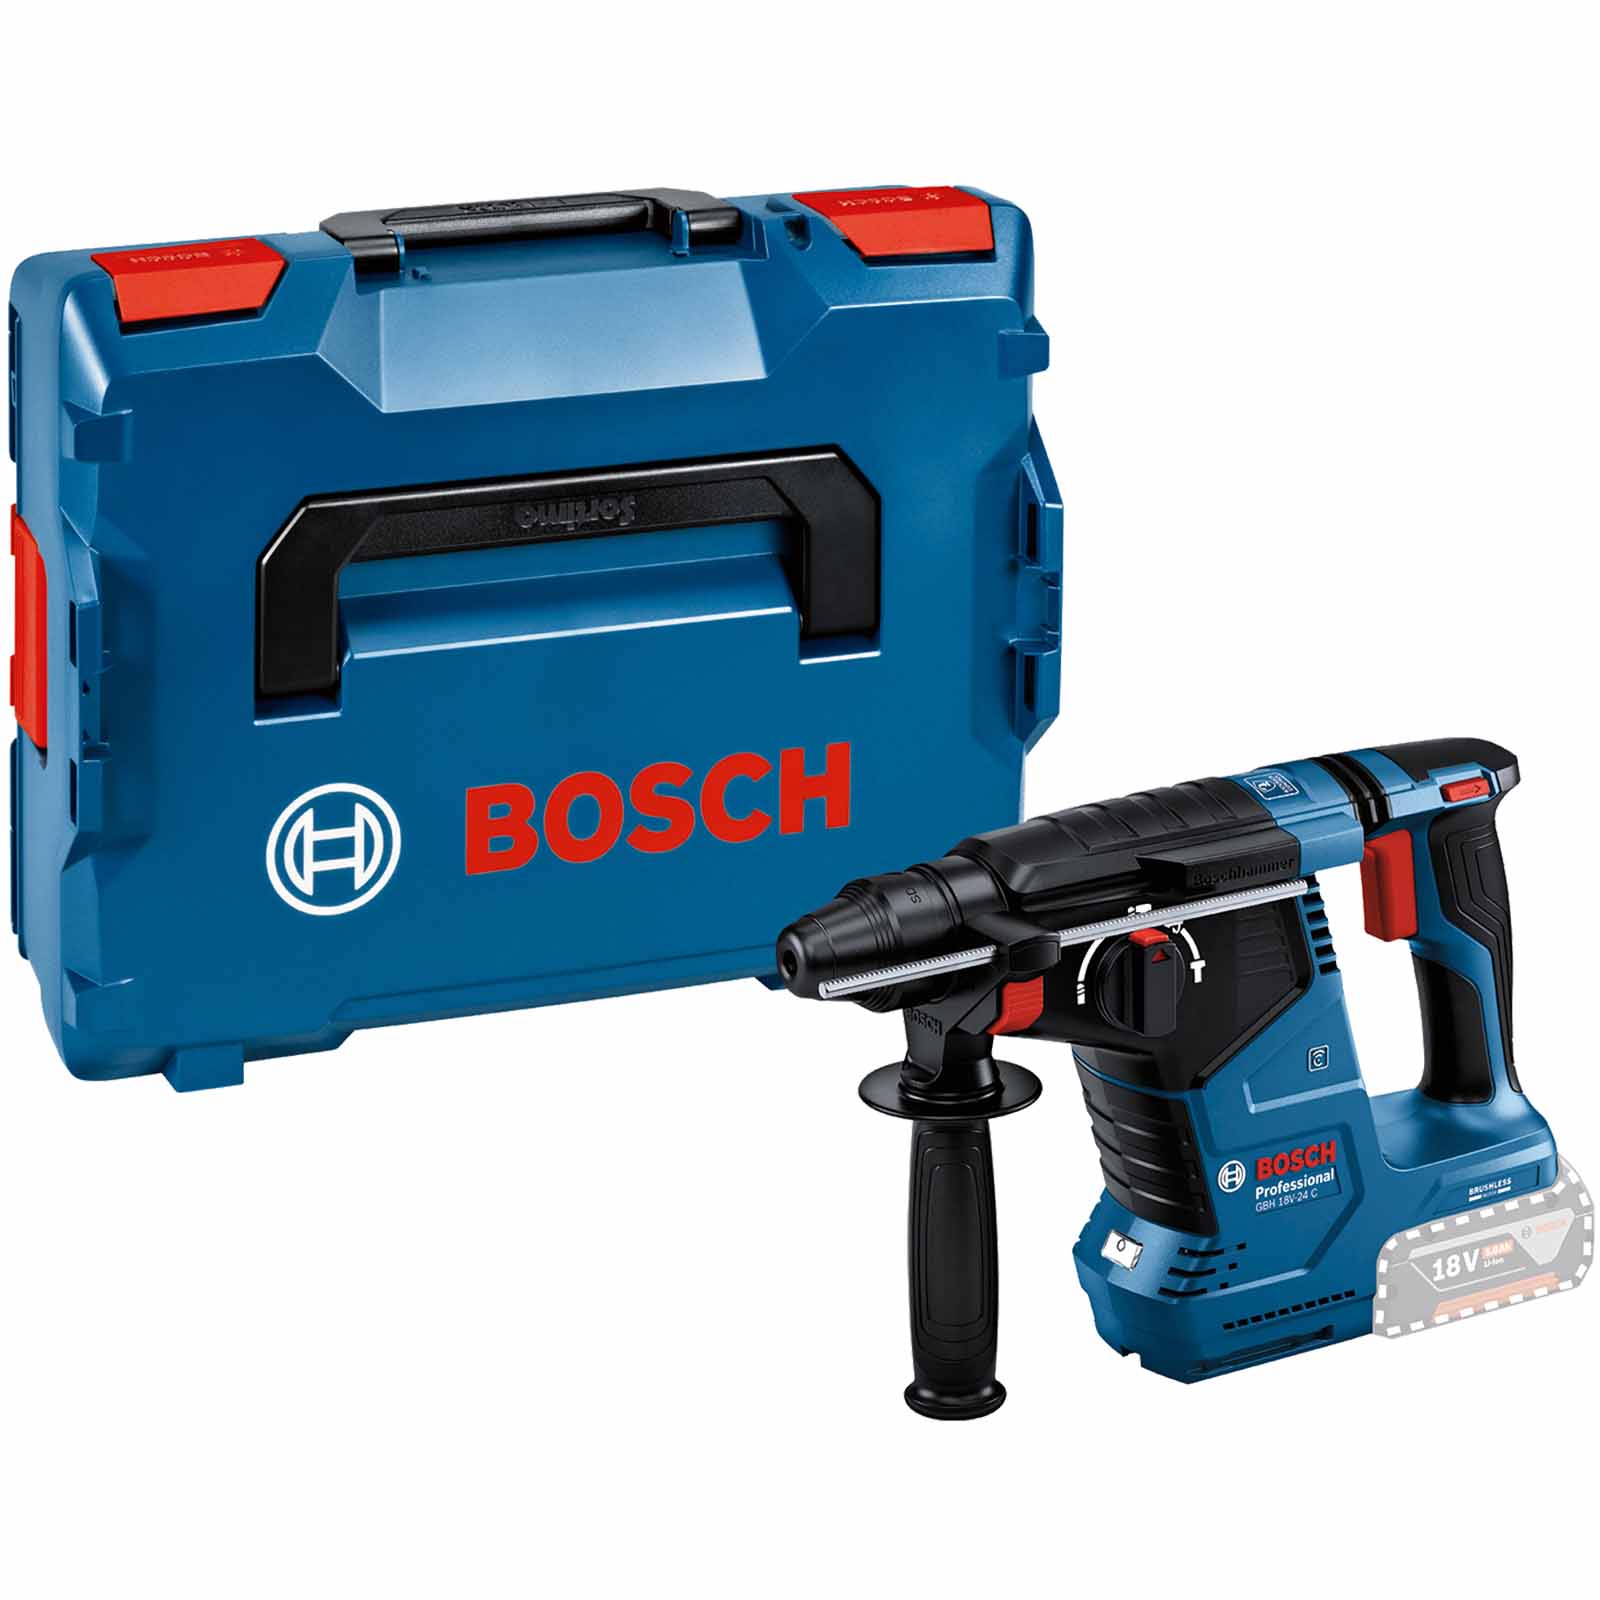 Bosch GBH 18V-24 C 18v Cordless Brushless SDS Plus Drill No Batteries No Charger Case